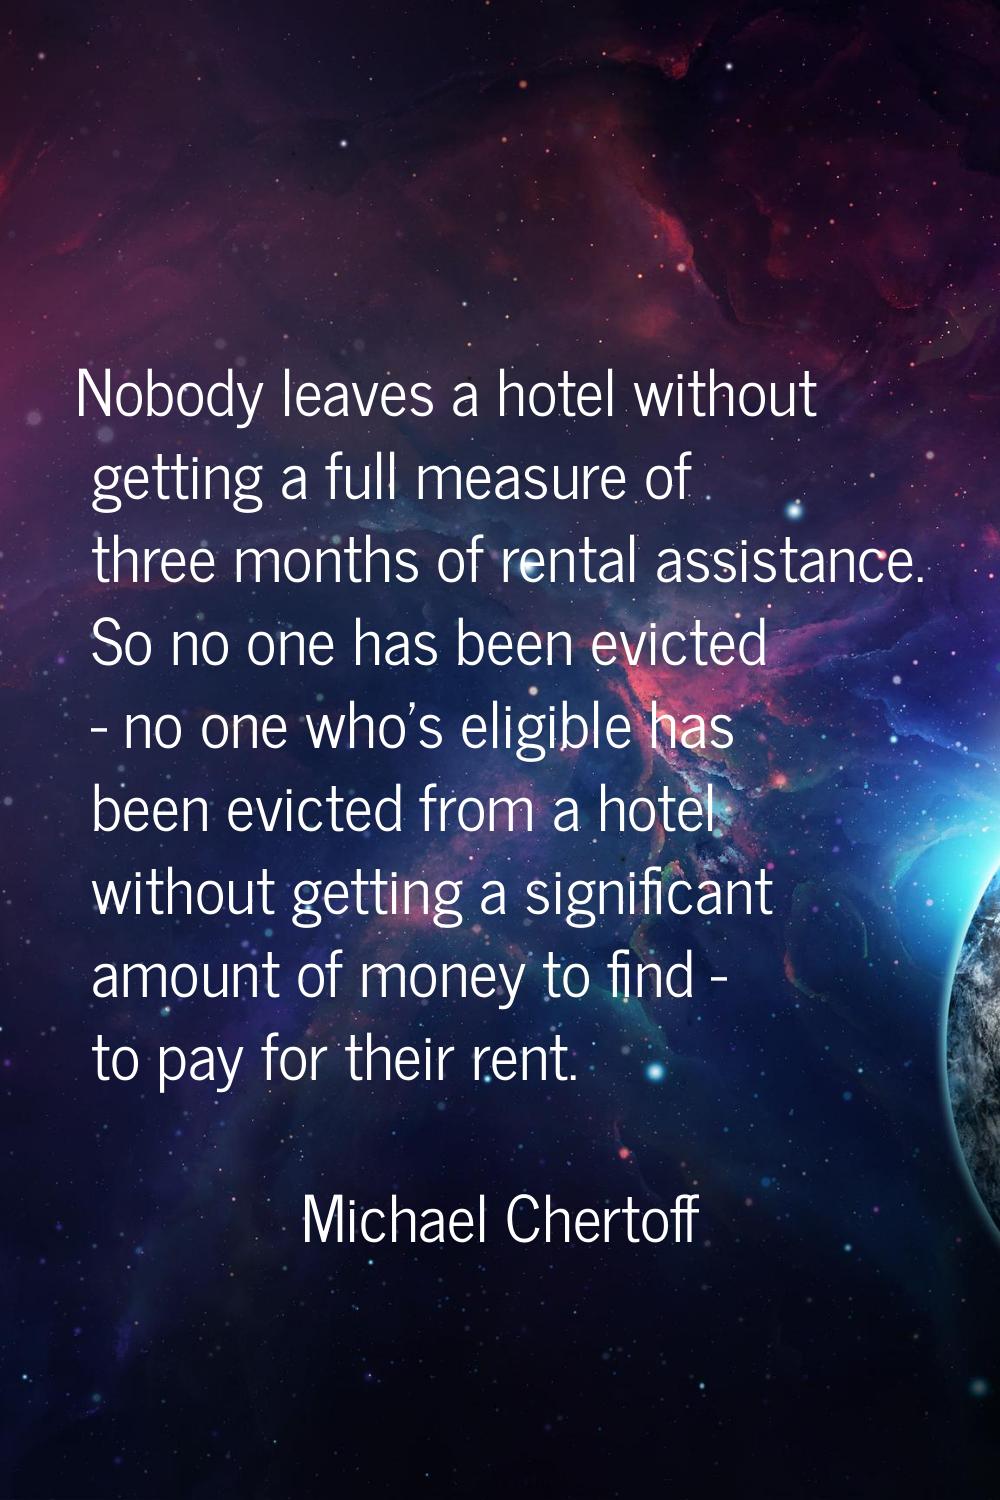 Nobody leaves a hotel without getting a full measure of three months of rental assistance. So no on